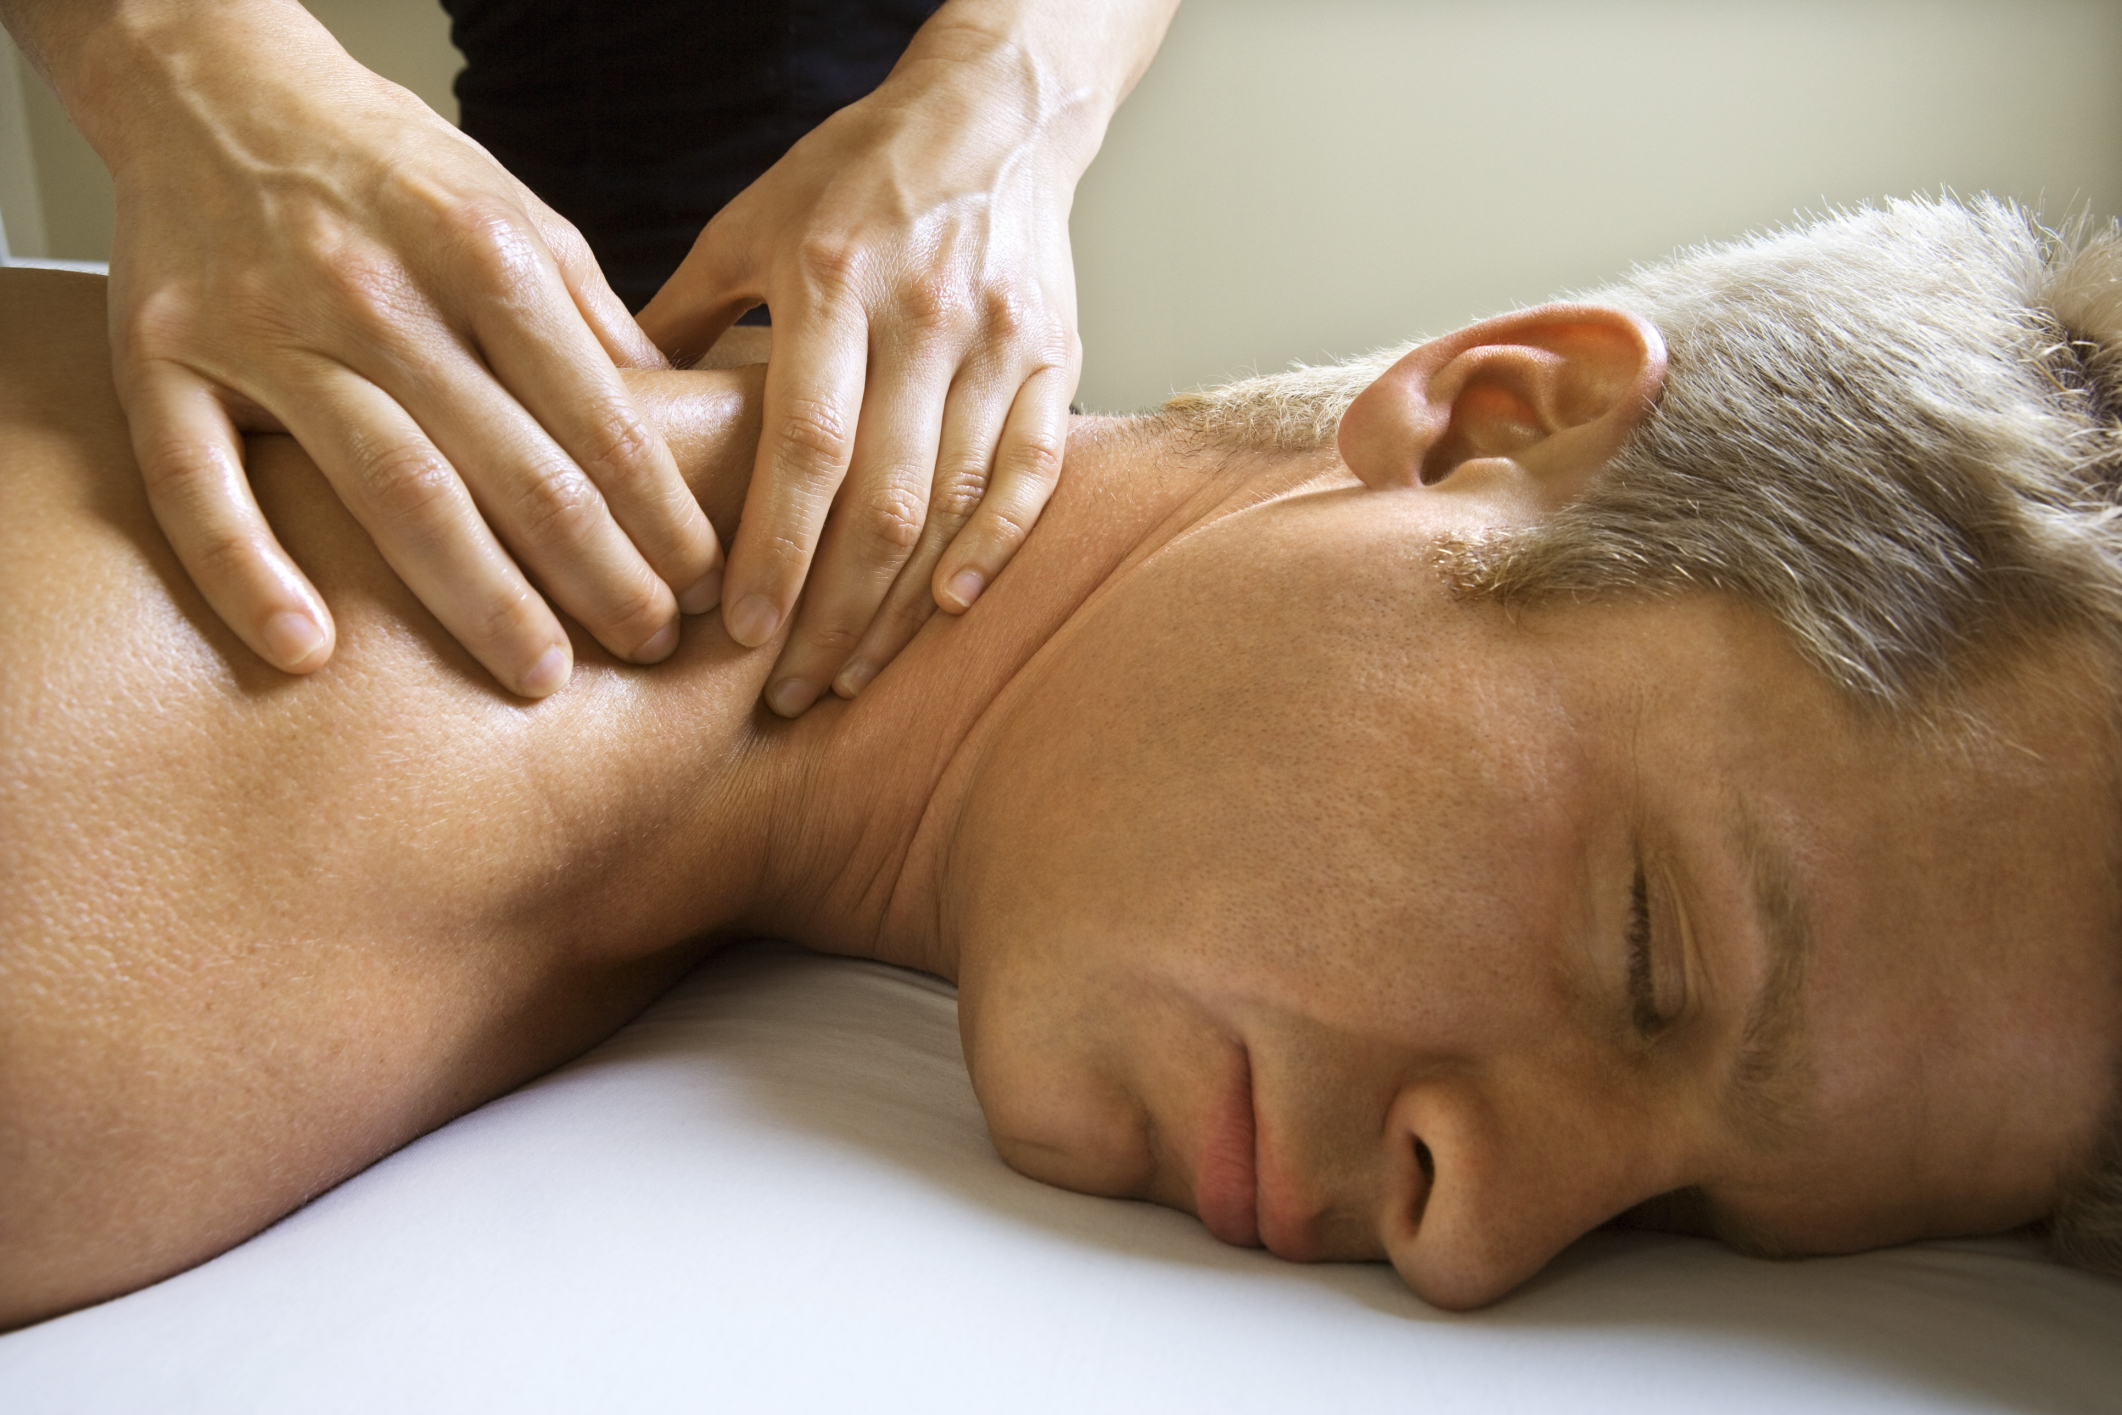 How to Get The Most Out of Your Massage